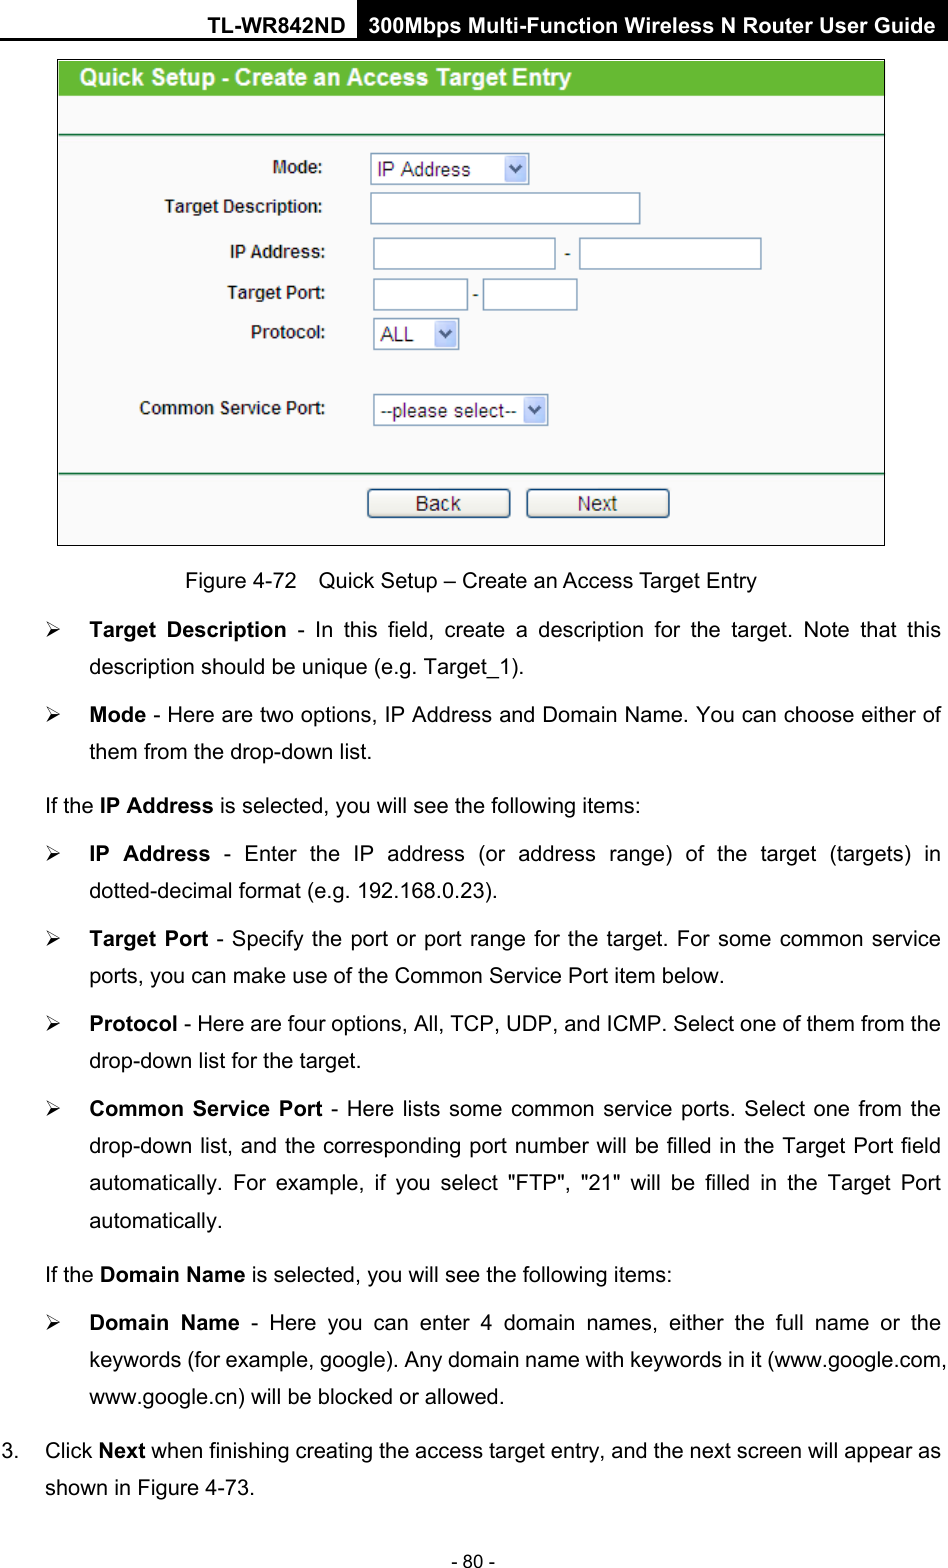 TL-WR842ND 300Mbps Multi-Function Wireless N Router User Guide  - 80 -  Figure 4-72  Quick Setup – Create an Access Target Entry  Target Description - In this field, create a description for the target. Note that this description should be unique (e.g. Target_1).    Mode - Here are two options, IP Address and Domain Name. You can choose either of them from the drop-down list.   If the IP Address is selected, you will see the following items:  IP Address - Enter the IP address (or address range) of the target (targets) in dotted-decimal format (e.g. 192.168.0.23).    Target Port - Specify the port or port range for the target. For some common service ports, you can make use of the Common Service Port item below.    Protocol - Here are four options, All, TCP, UDP, and ICMP. Select one of them from the drop-down list for the target.    Common Service Port  -  Here lists some common service ports. Select one from the drop-down list, and the corresponding port number will be filled in the Target Port field automatically. For example, if you select &quot;FTP&quot;, &quot;21&quot; will be filled in the Target Port automatically.   If the Domain Name is selected, you will see the following items:  Domain Name  -  Here you can enter 4 domain names, either the full name or the keywords (for example, google). Any domain name with keywords in it (www.google.com, www.google.cn) will be blocked or allowed.   3.  Click Next when finishing creating the access target entry, and the next screen will appear as shown in Figure 4-73. 